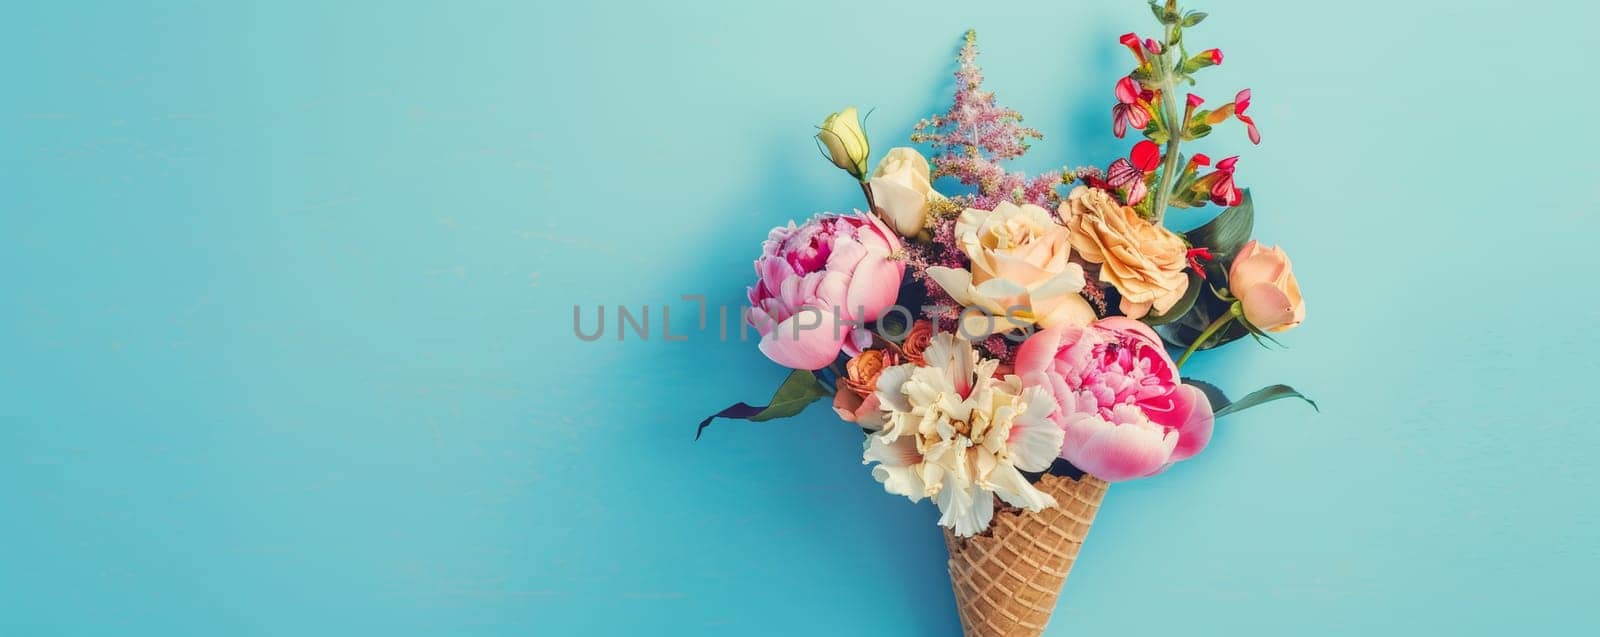 Floral arrangement in an ice cream cone on a blue background.